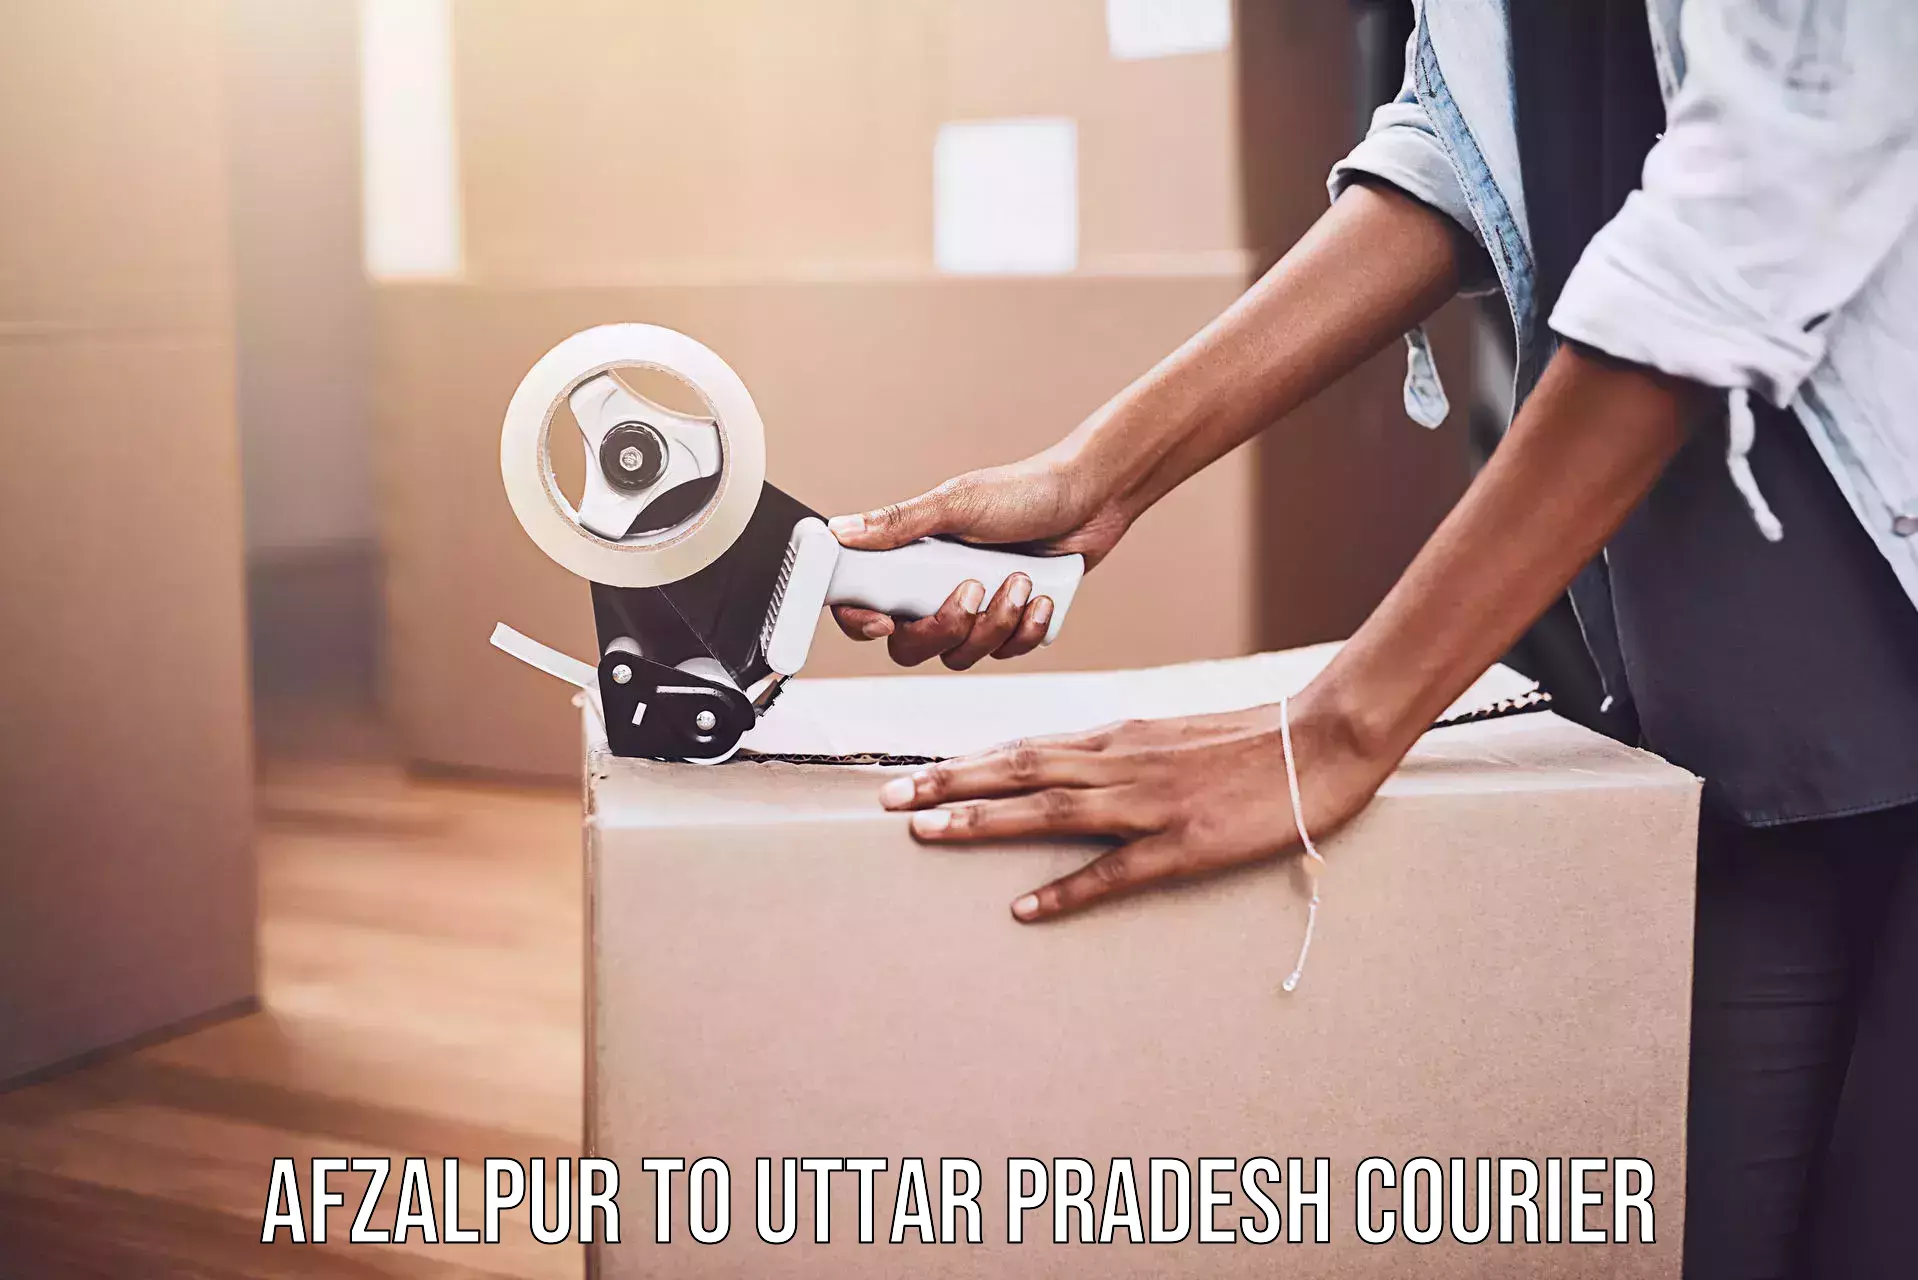 Bulk courier orders in Afzalpur to Aligarh